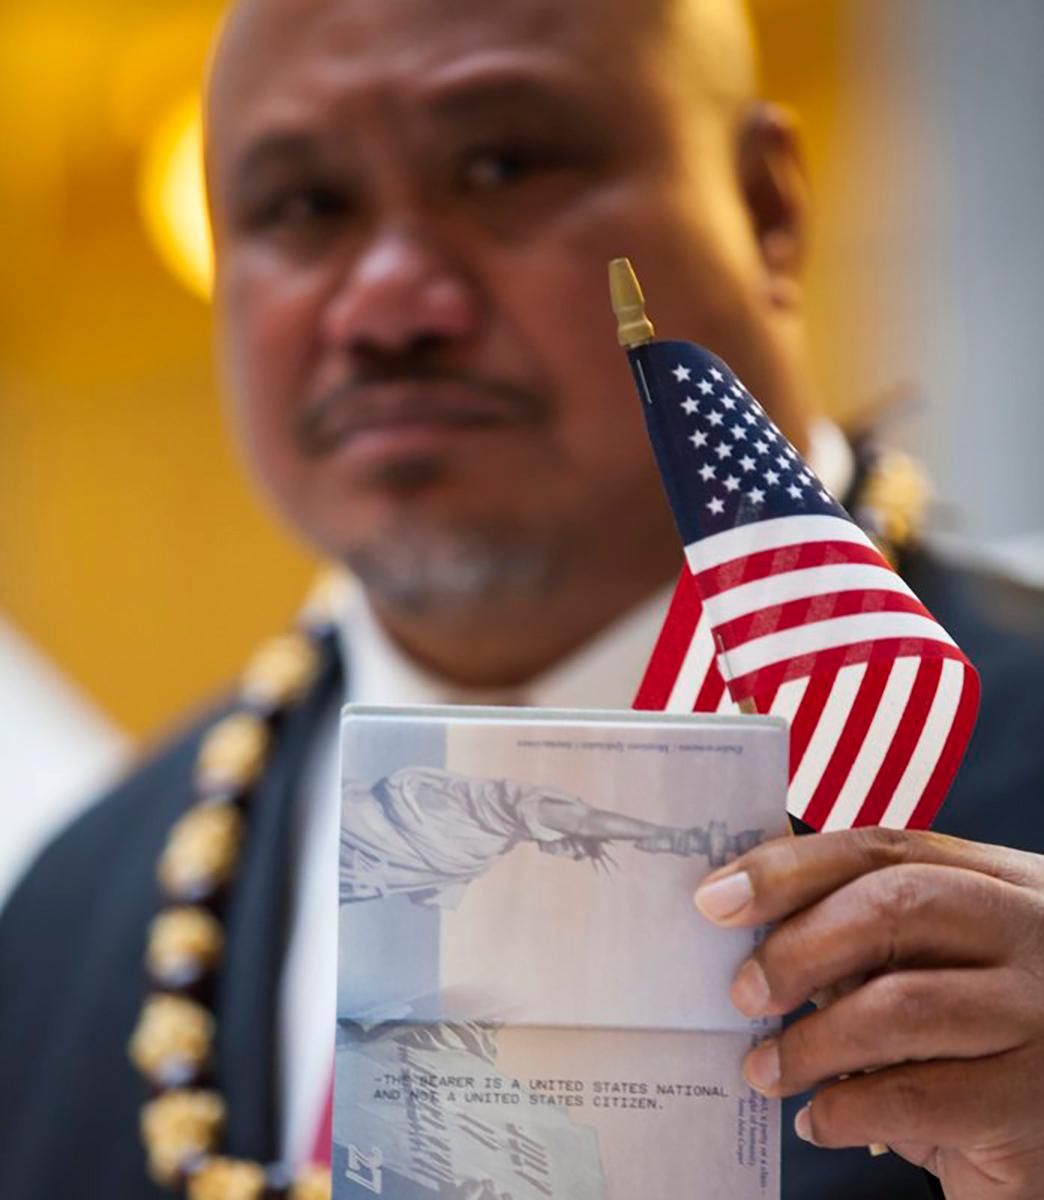 US should recognize American Samoans as citizens, judge says